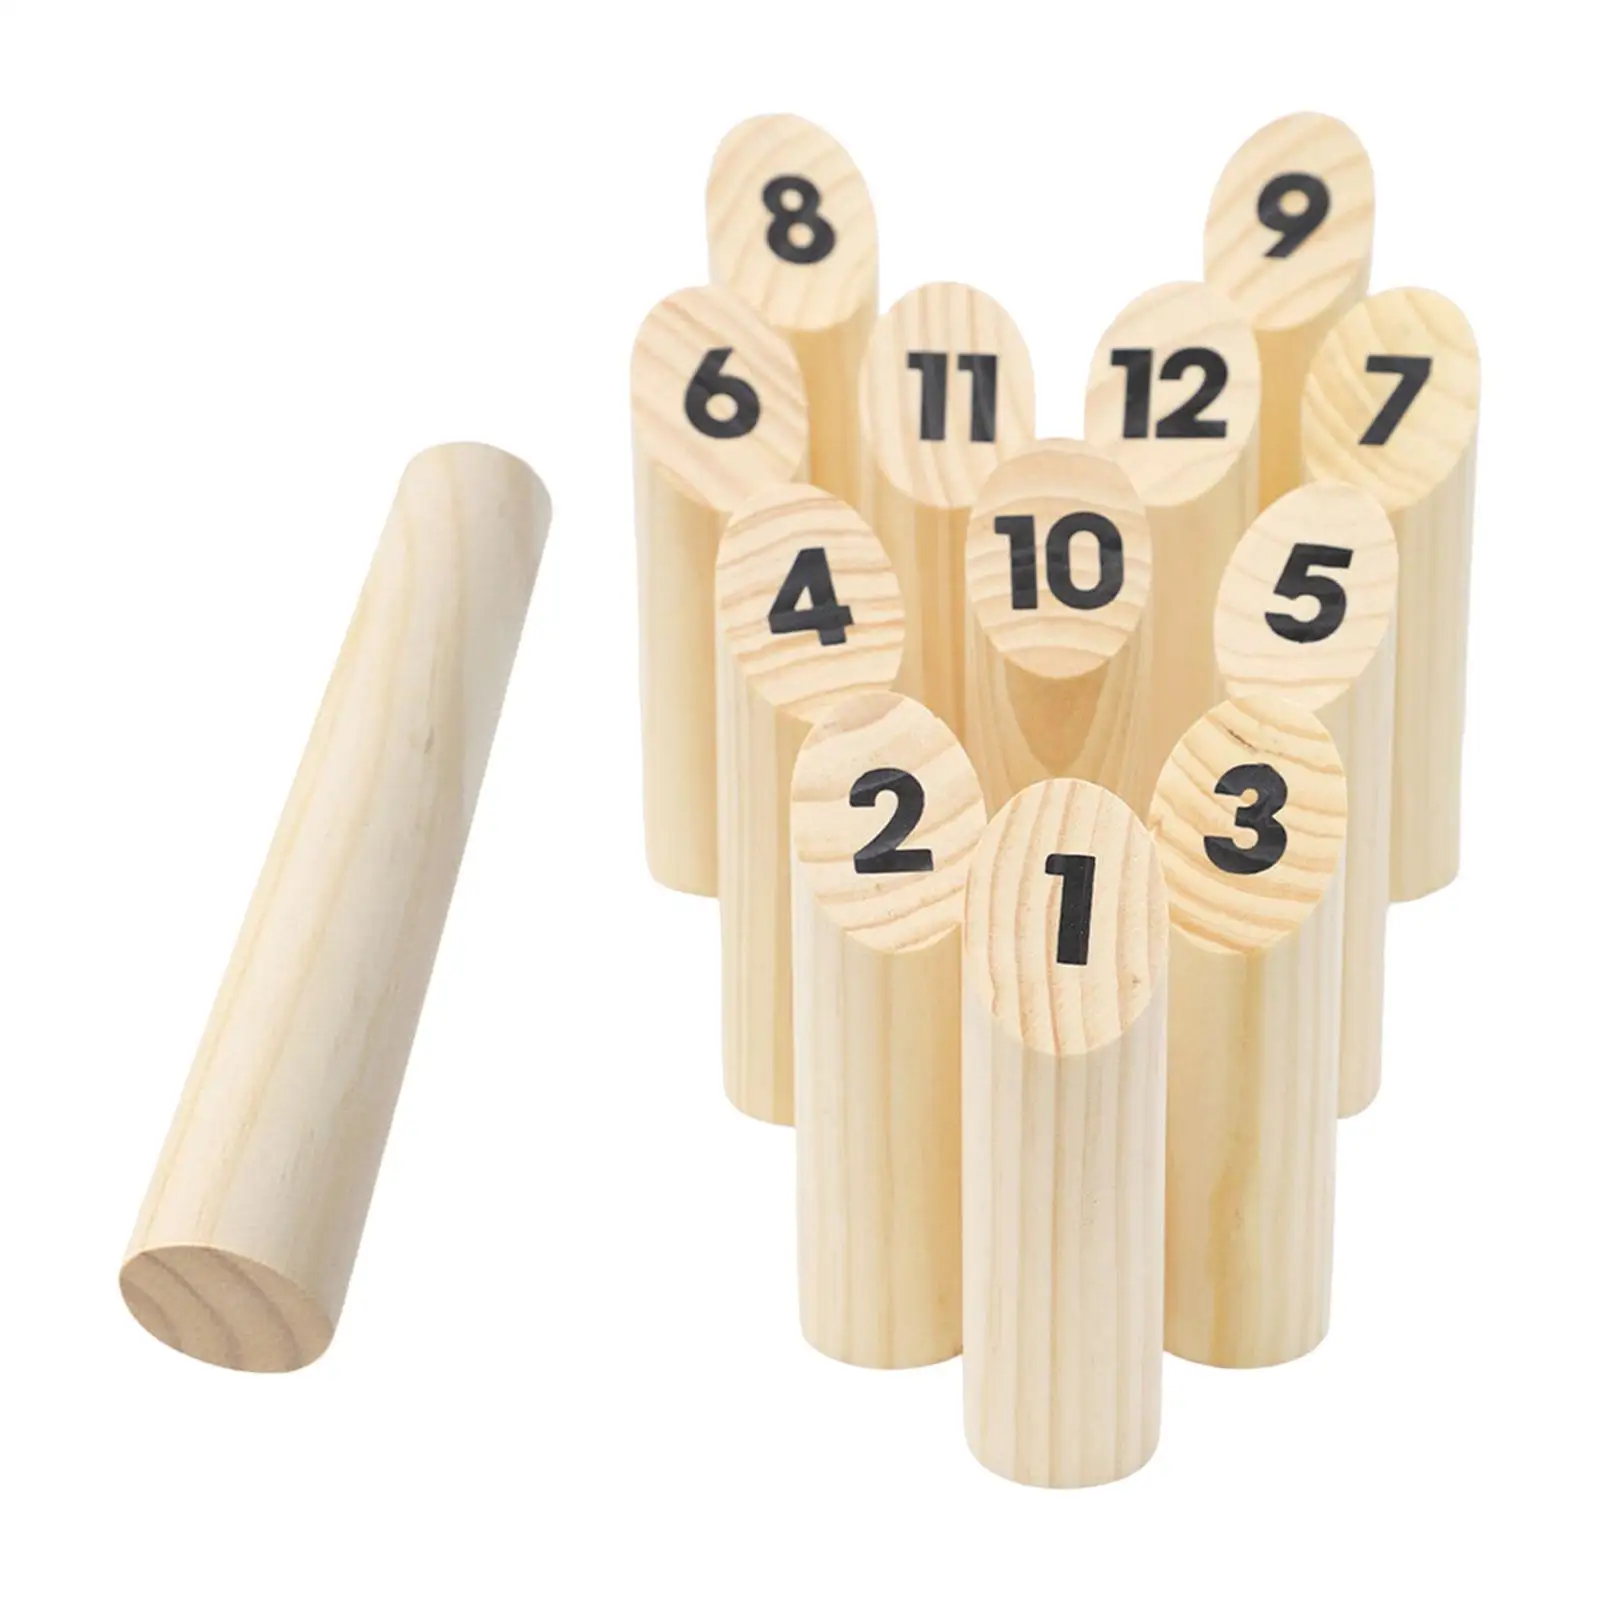 Wooden numbered block Toss Game Set Yard Game for Outdoor Lawn Picnic Backyard Garden